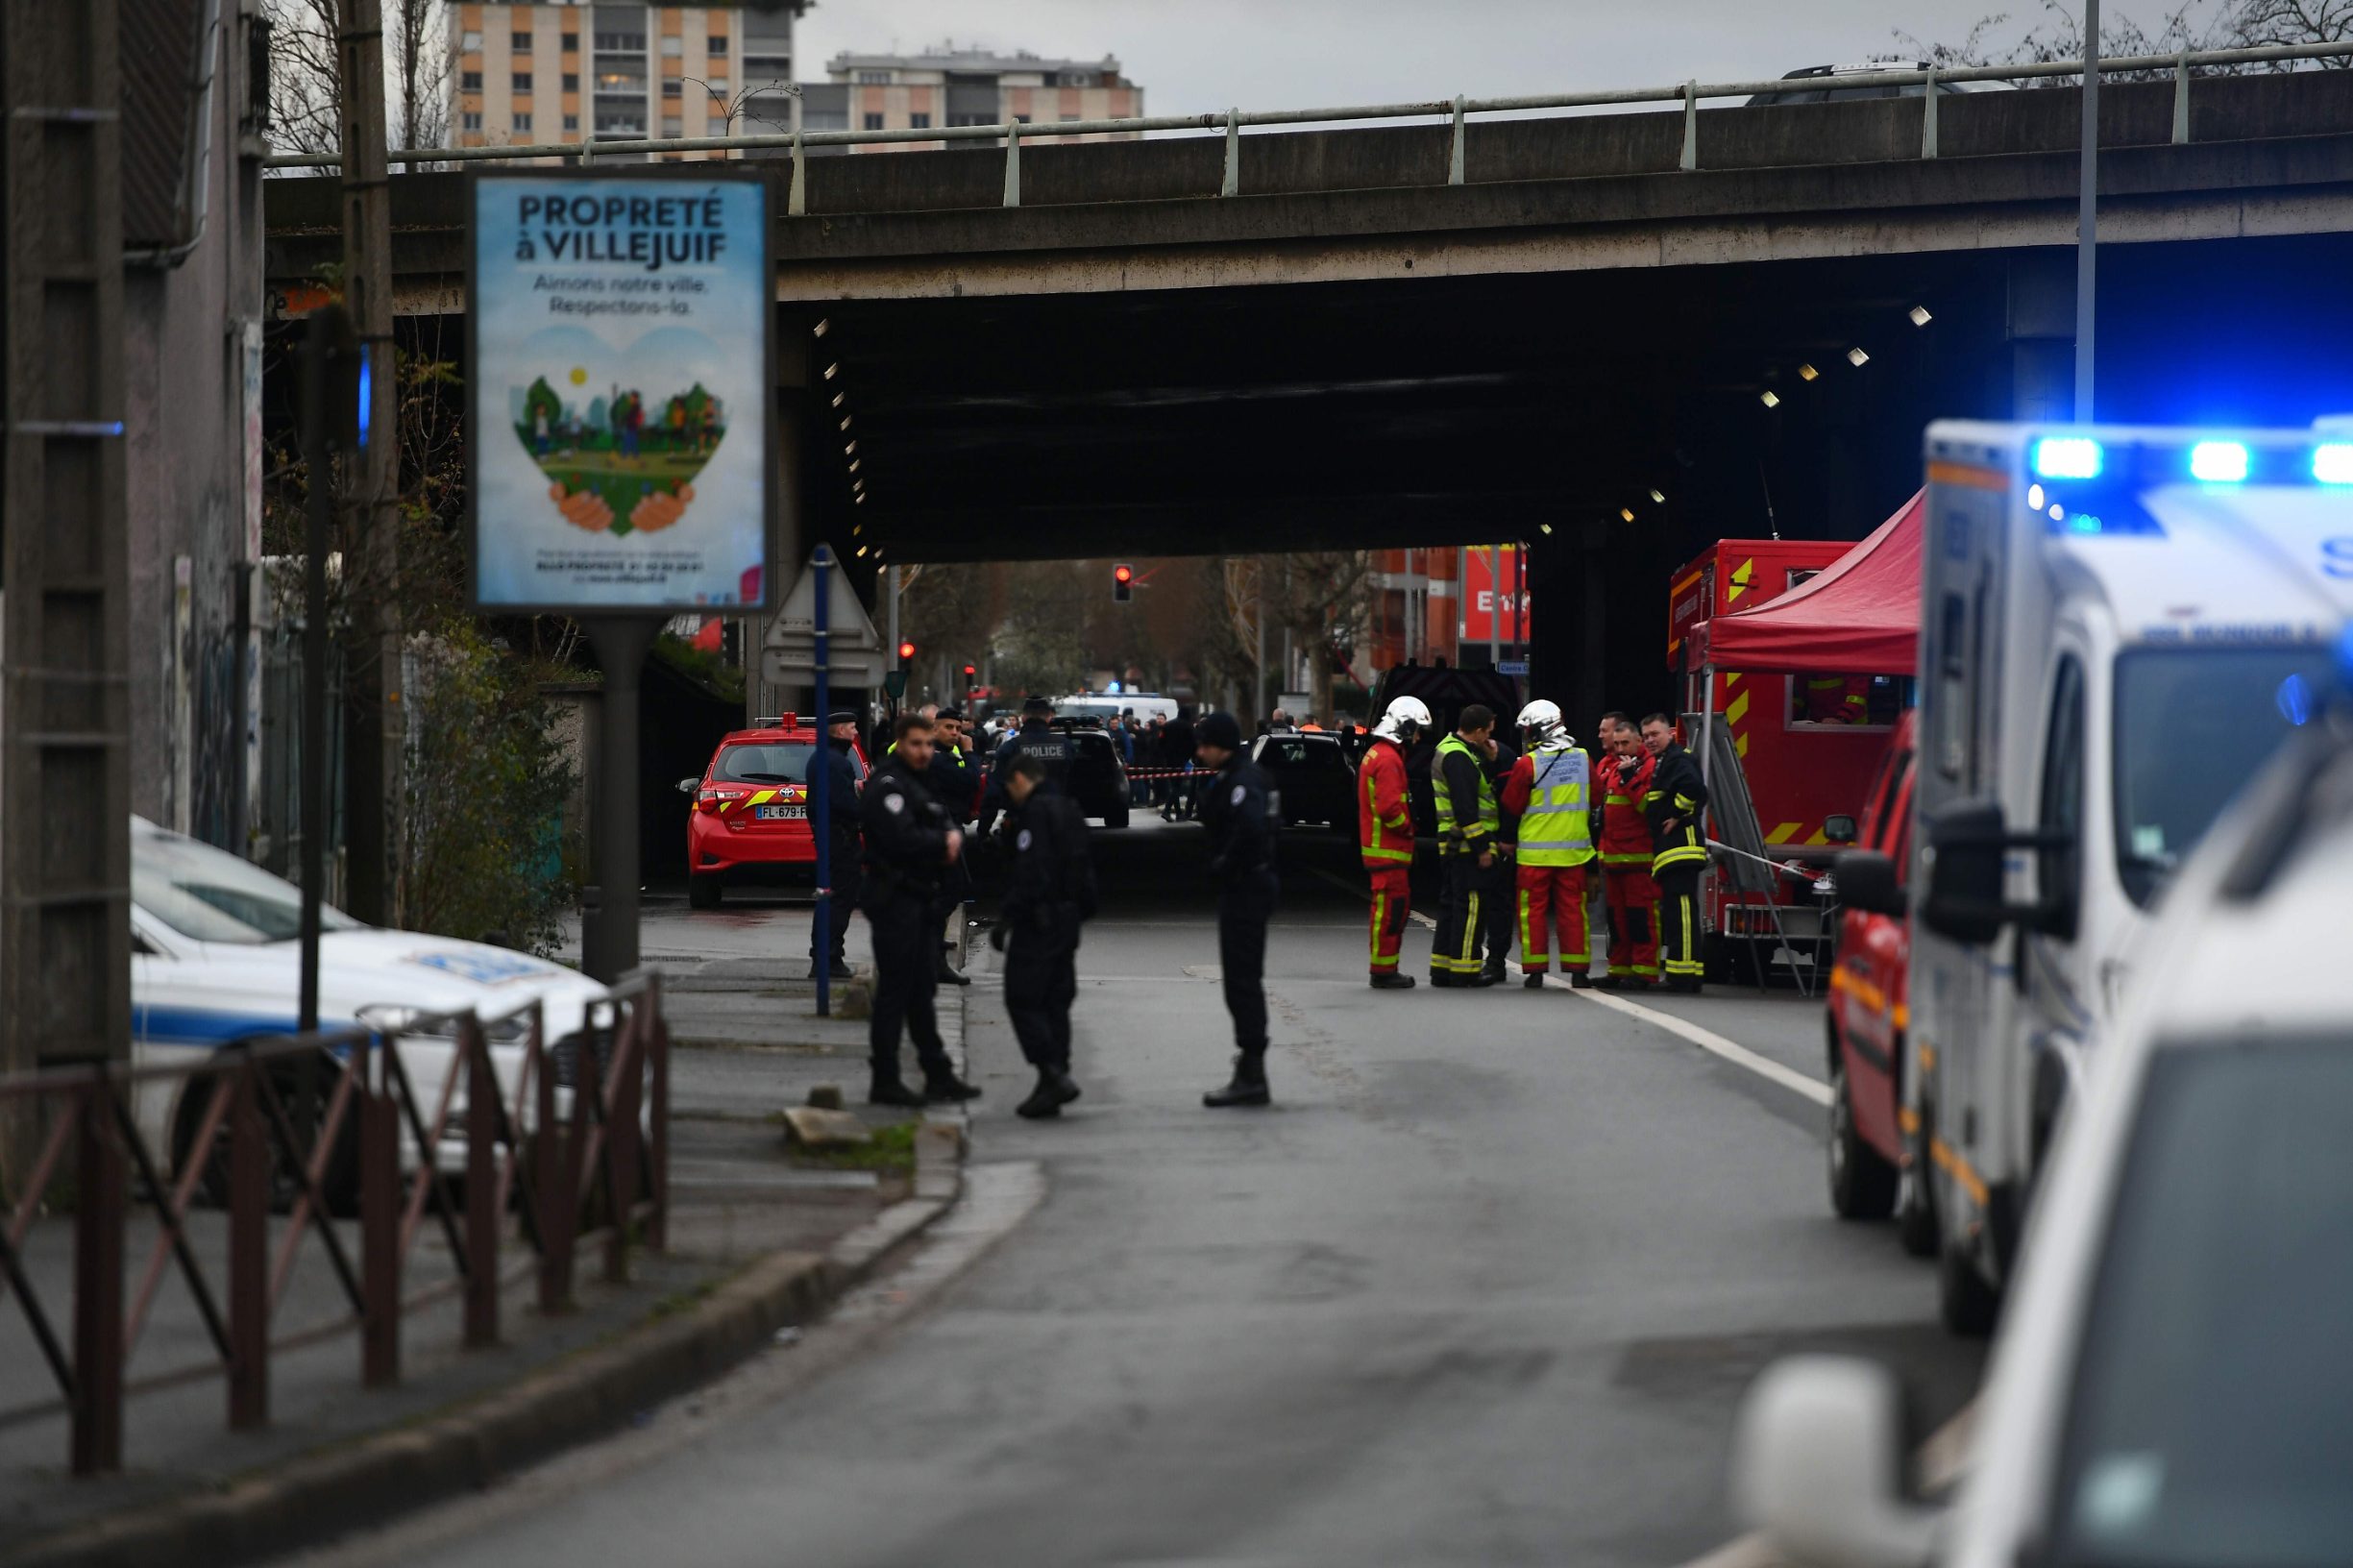 Police and firefighters gather on January 3, 2020 in L'Hay-les-Roses where police shot dead a knife-wielding man who killed one person and injured at least two others in a nearby park of the south of Paris' suburban city of Villejuif. - The man had attacked 